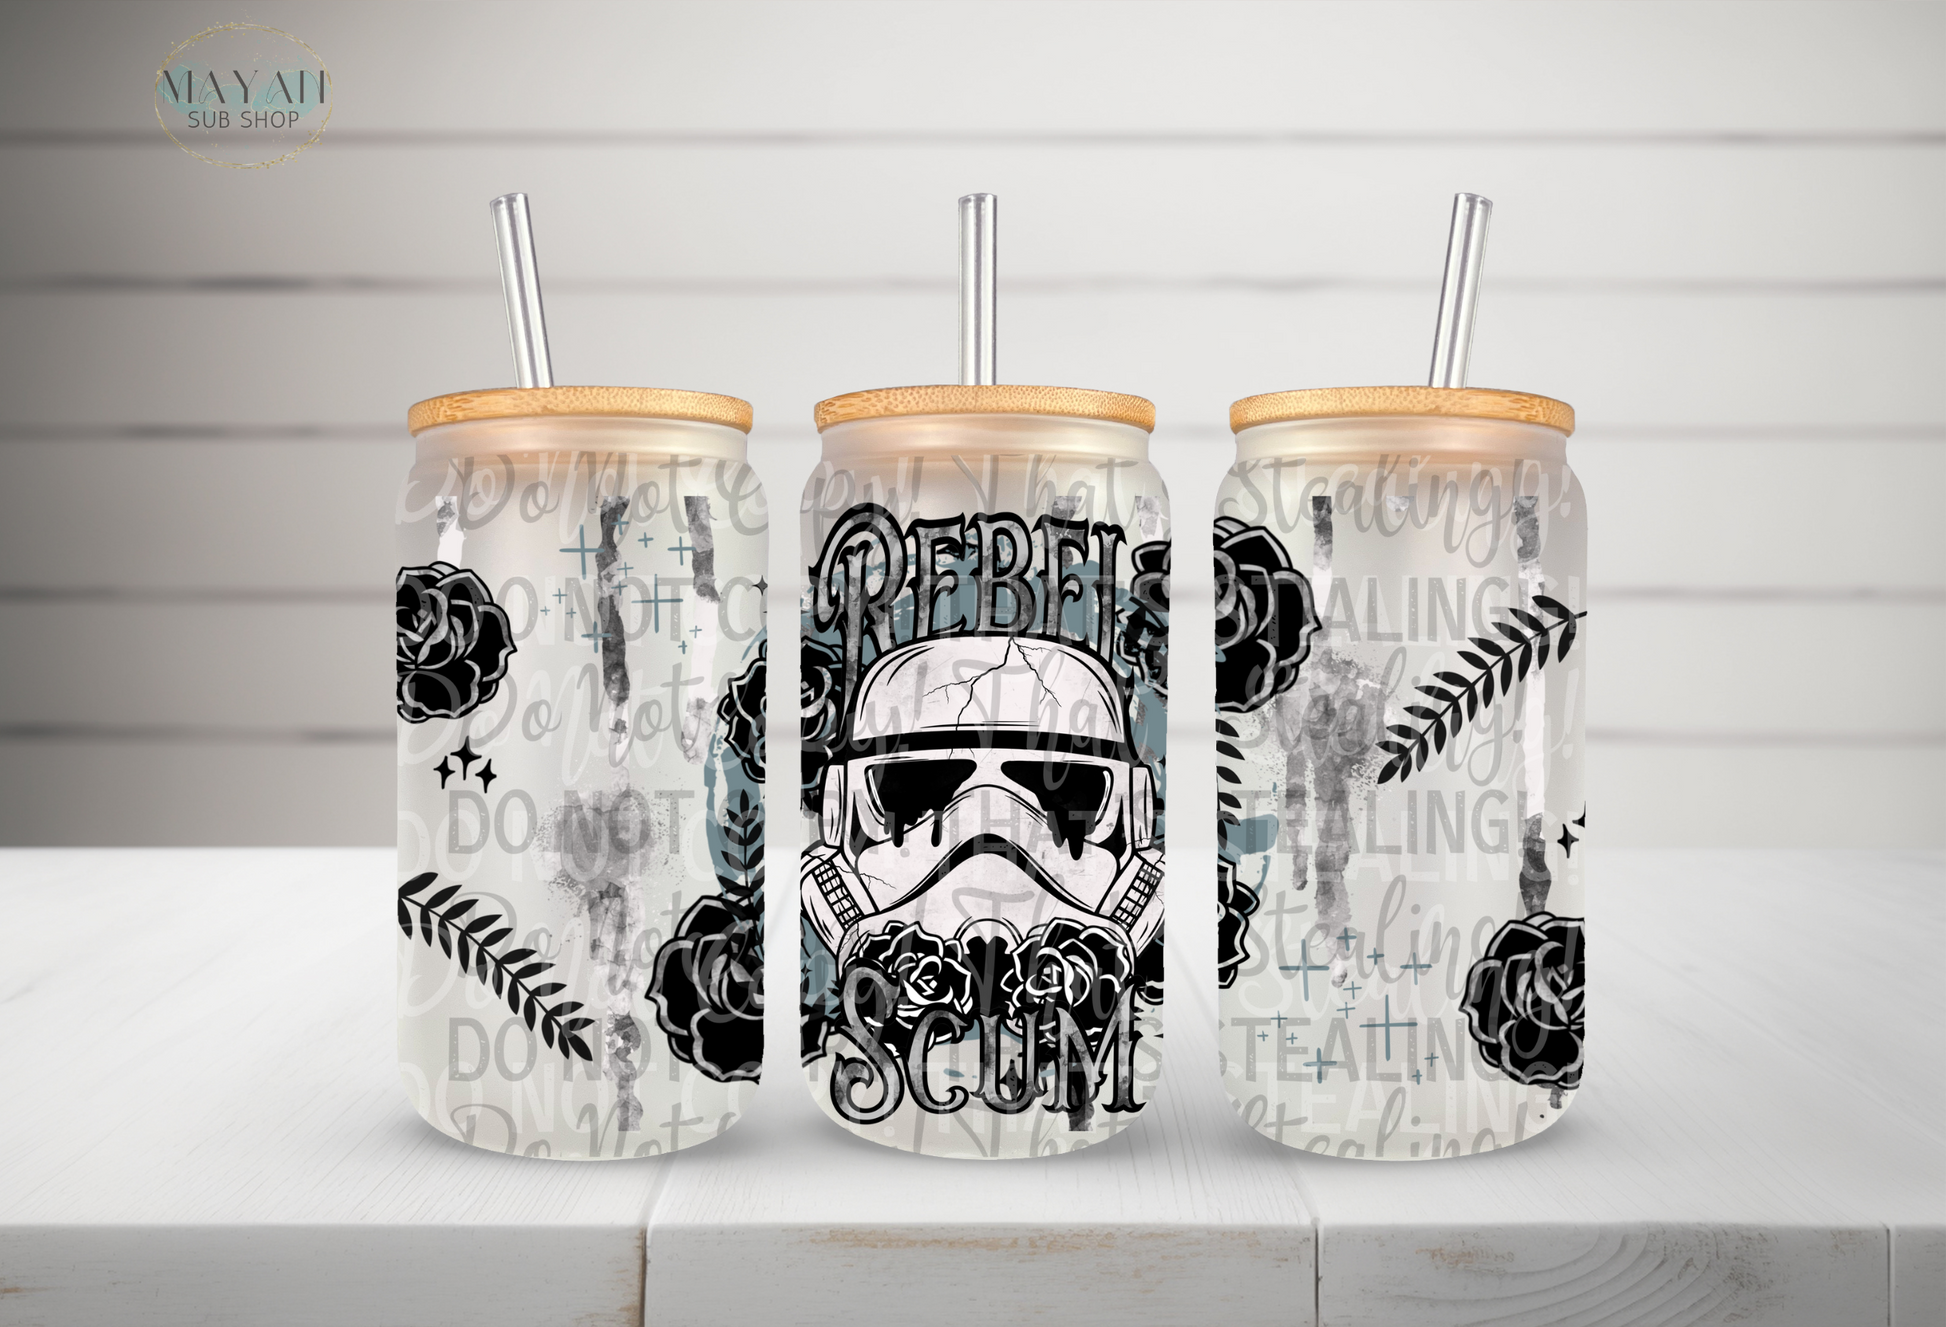 Rebel scum 18 oz. frosted glass can. -Mayan Sub Shop